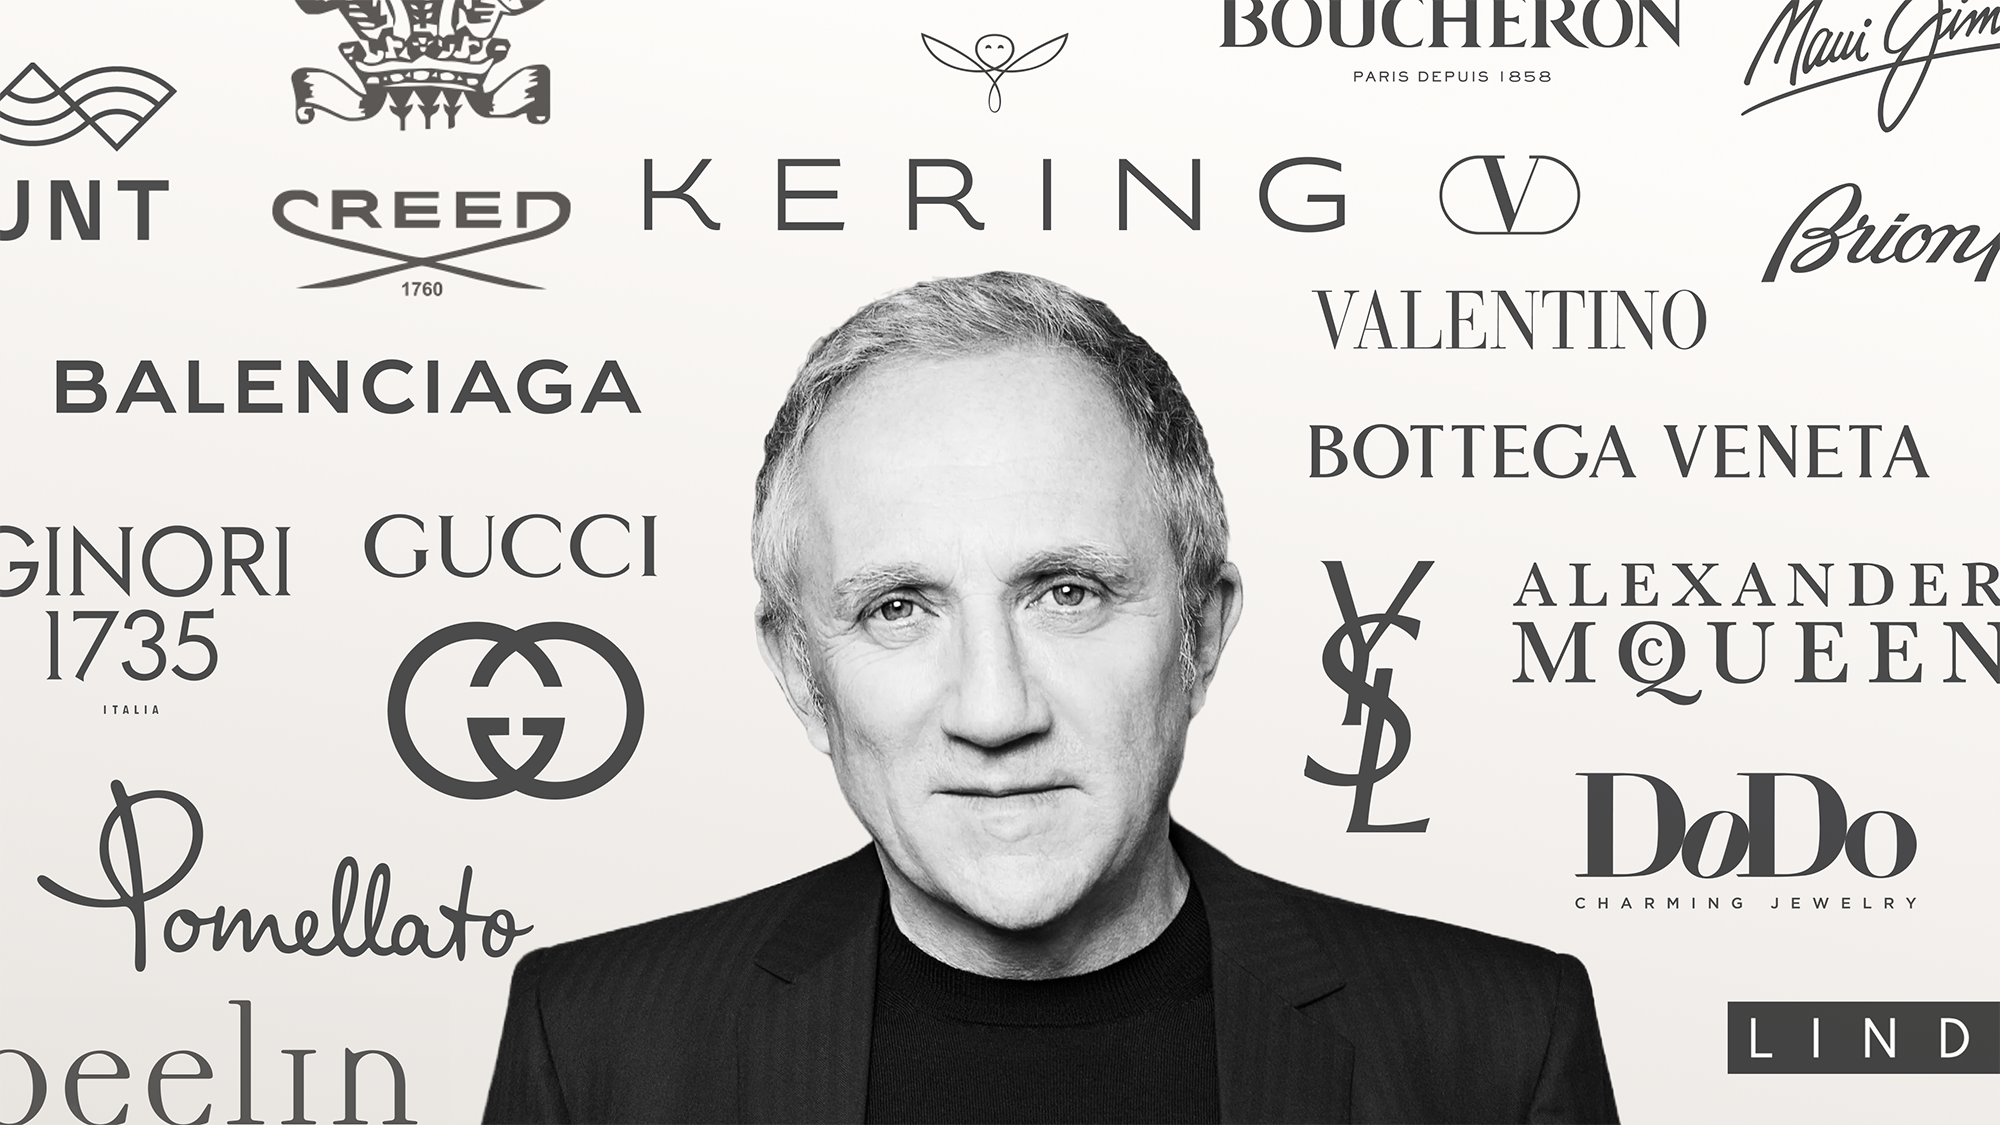 François-Henri Pinault: Chairman and CEO of Kering Group